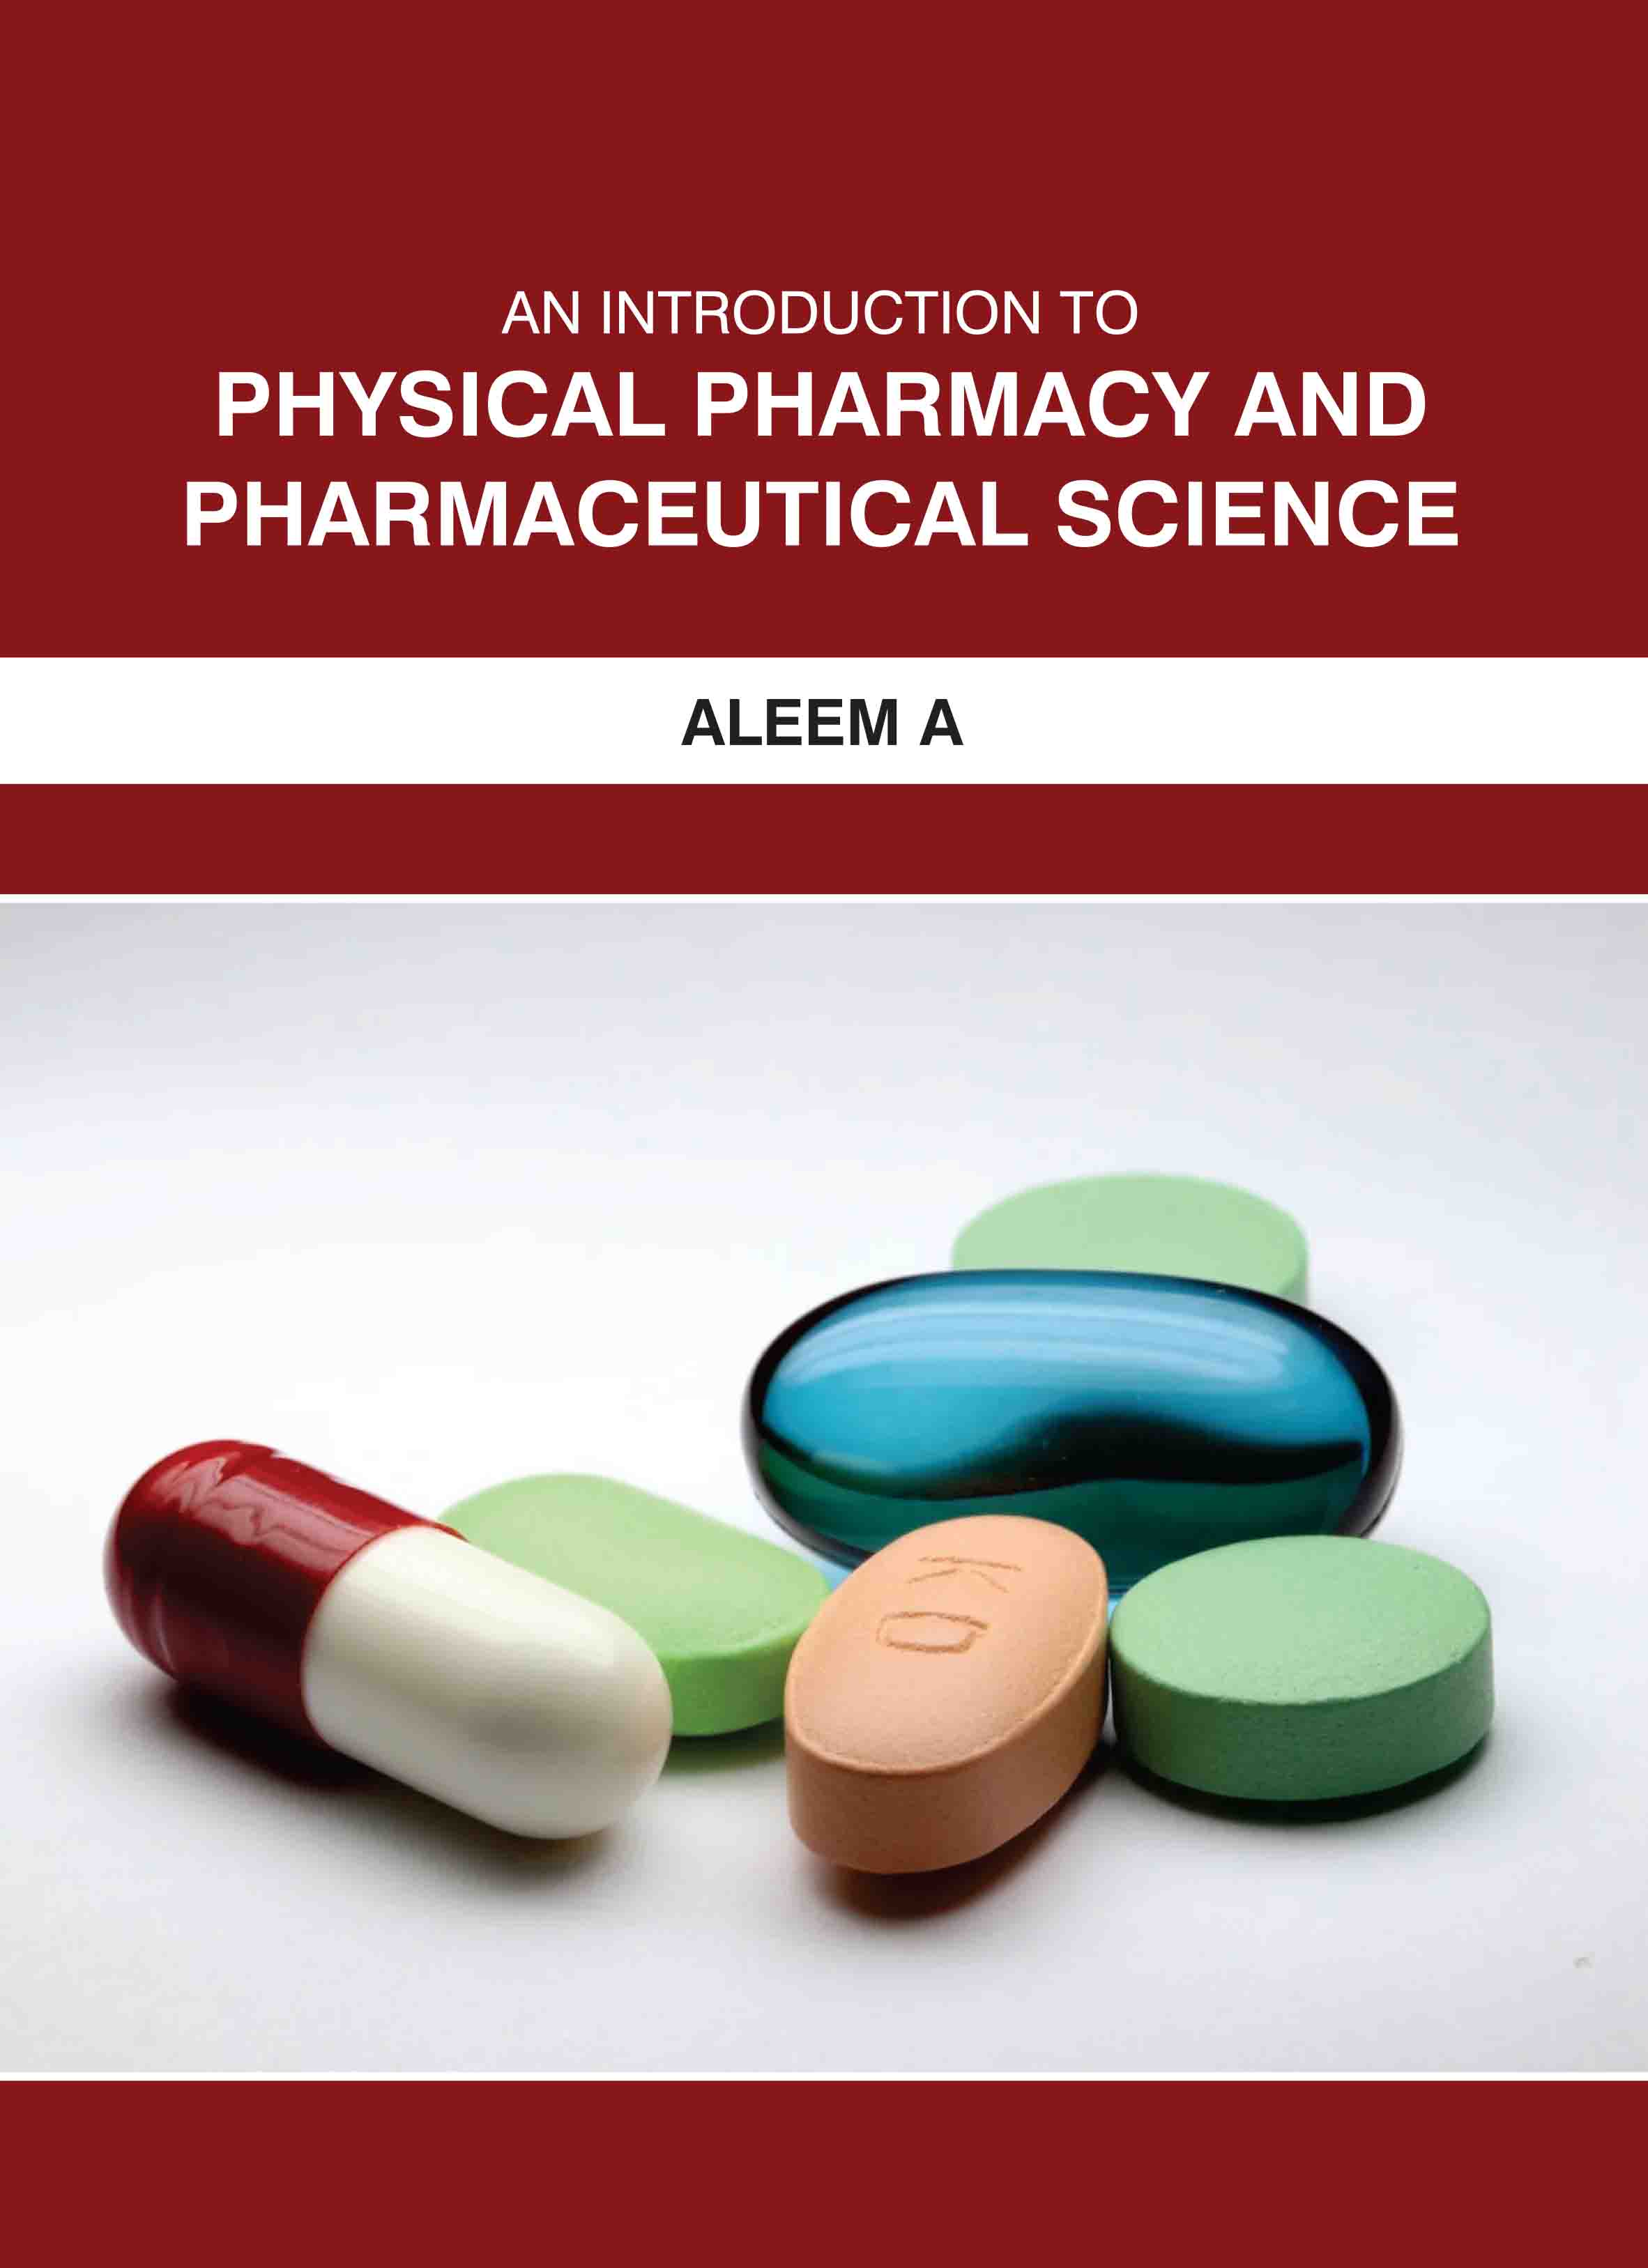 An Introduction to Physical Pharmacy and Pharmaceutical Science